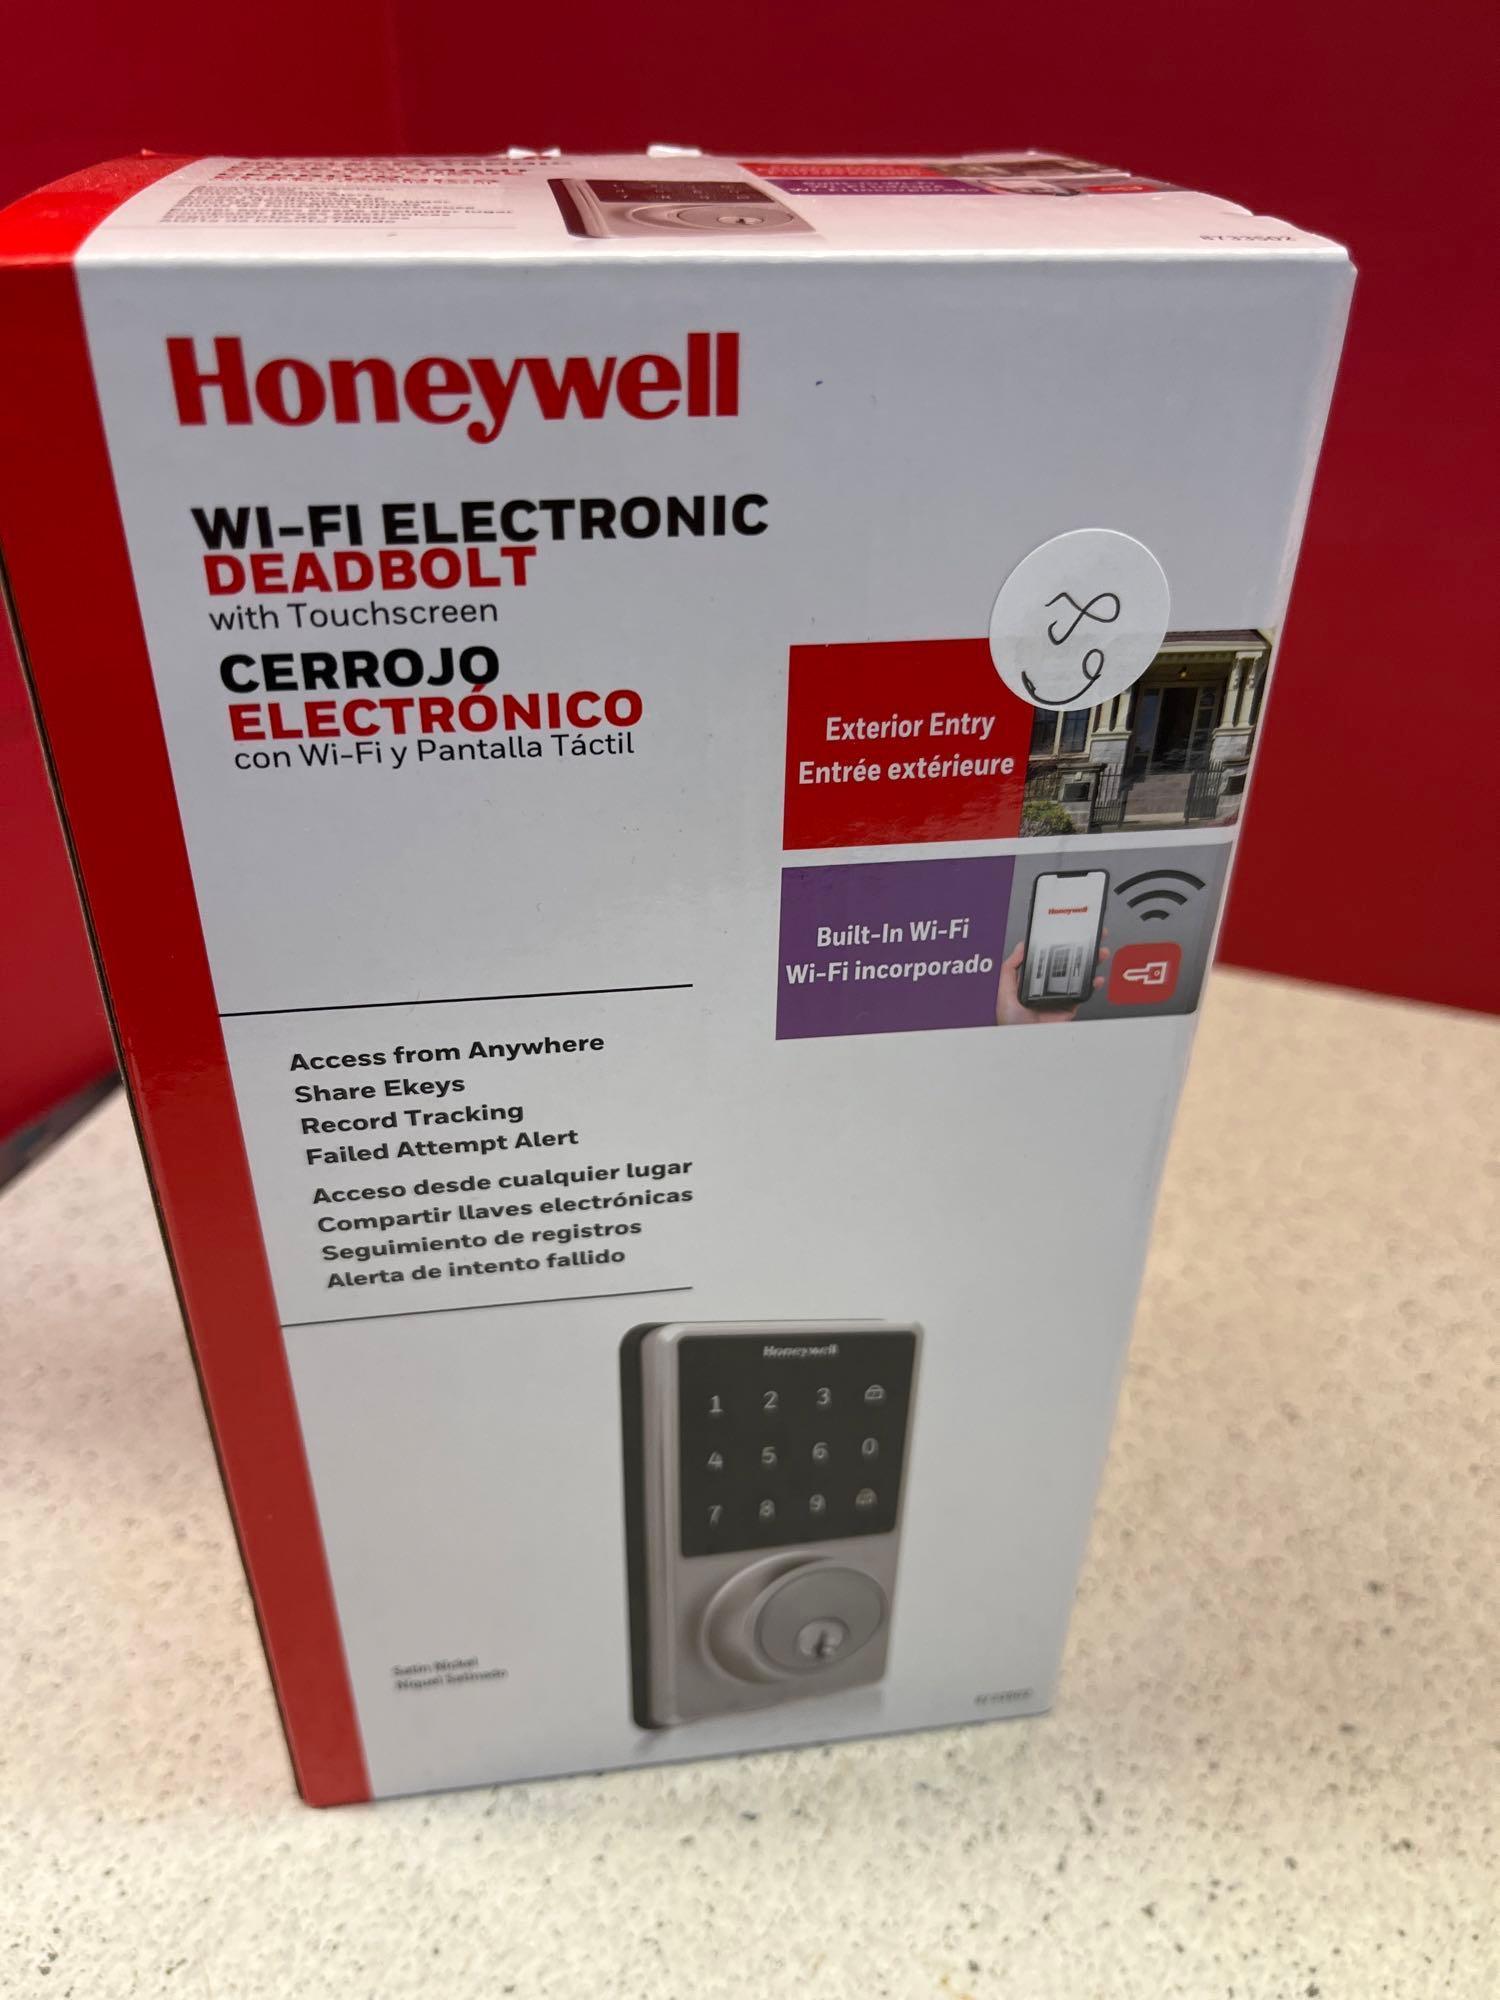 Open box Defiant Passage door knobs Honeywell Wi-Fi Electronic Deadbolt with touch screen and